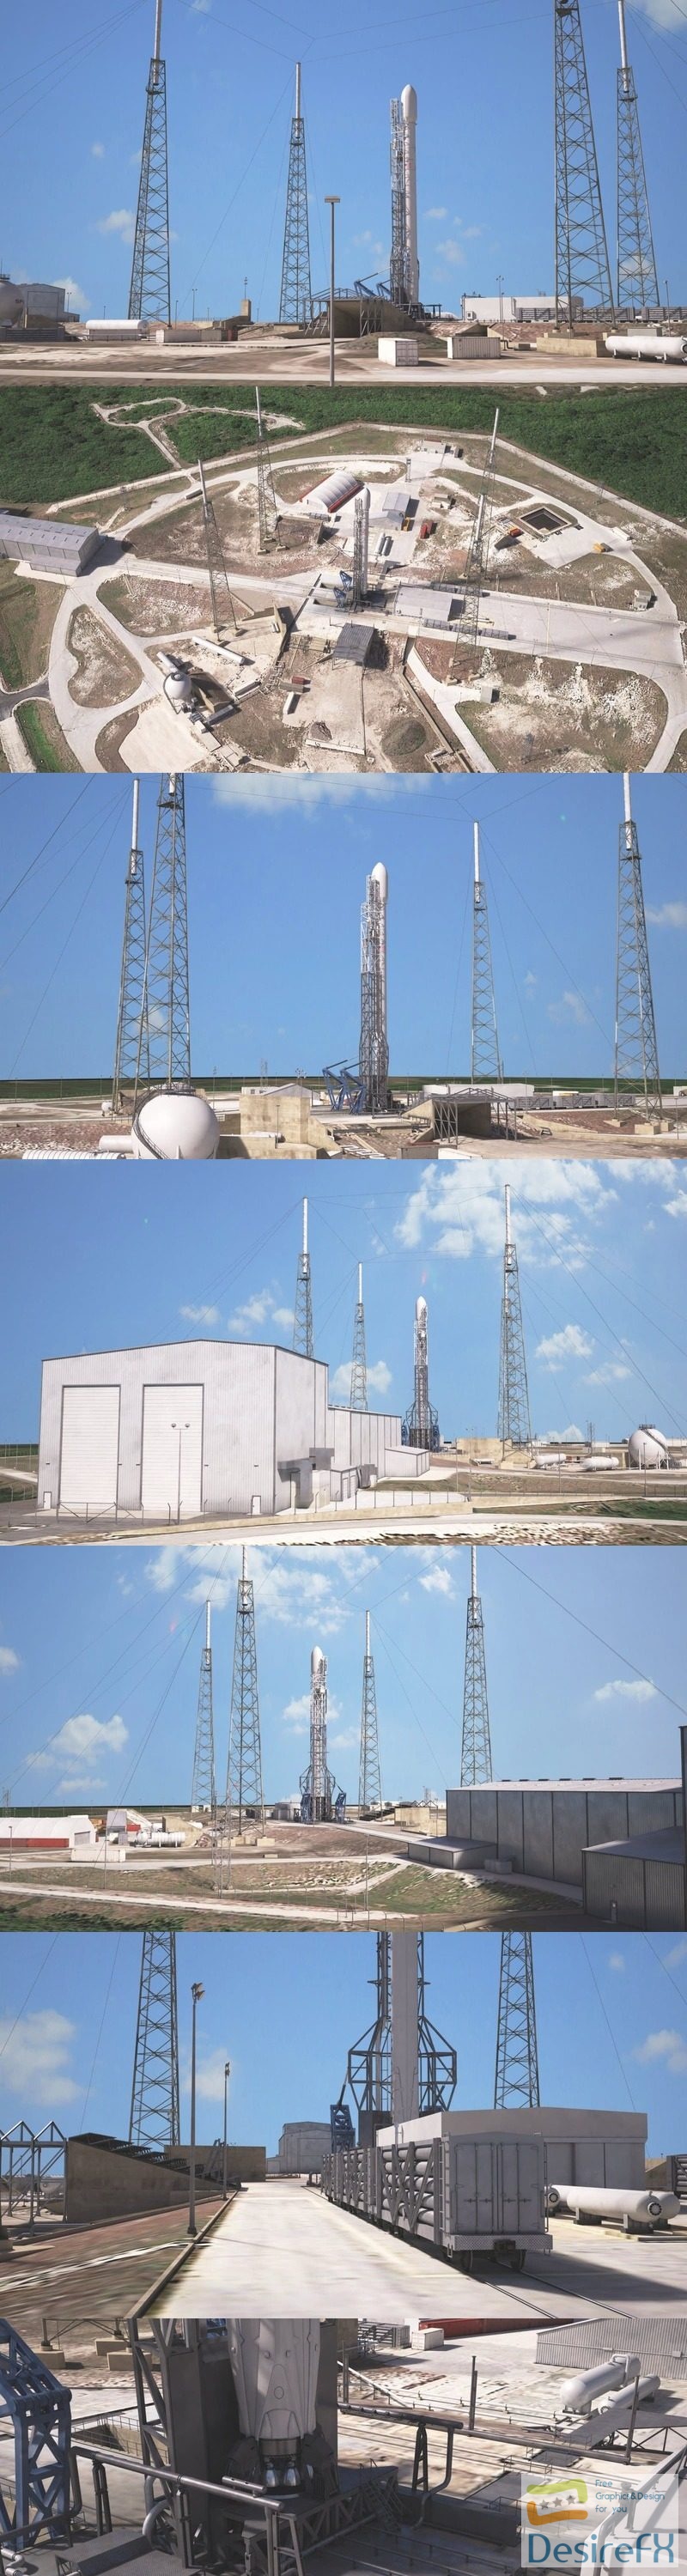 SpaceX Launch Pad Complex 3D Model